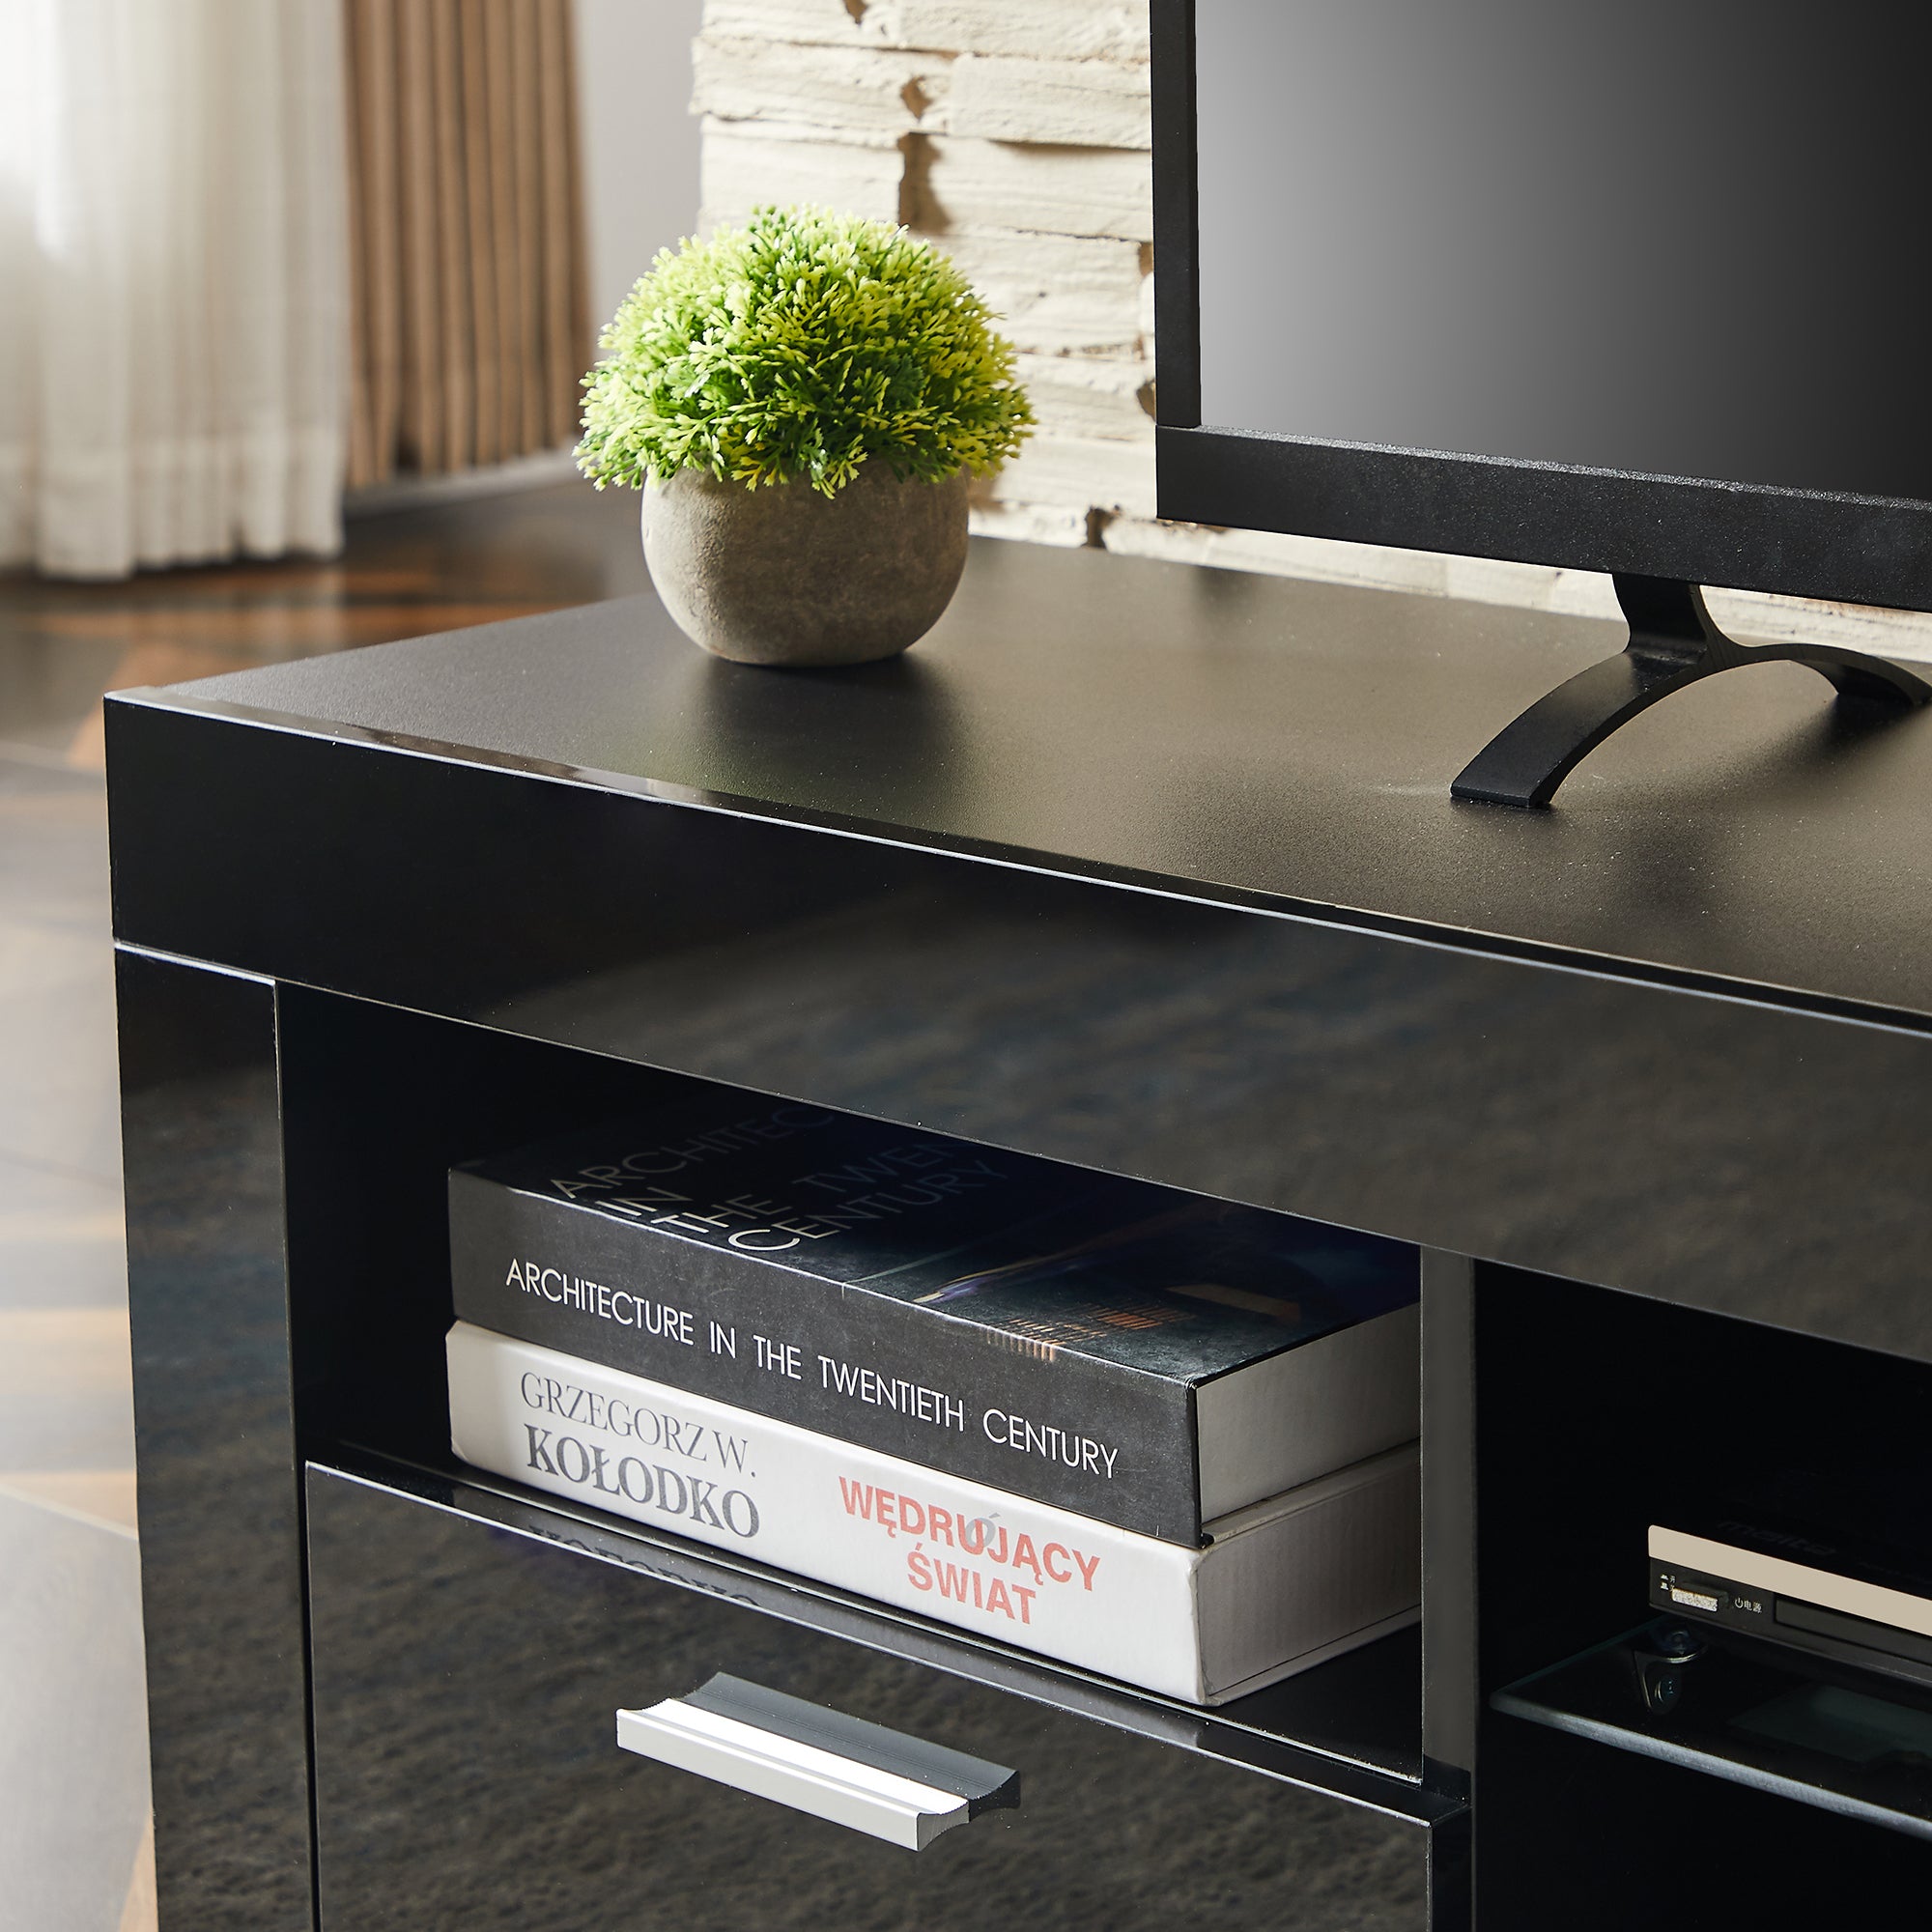 Modern TV Stand with LED Light (Black)